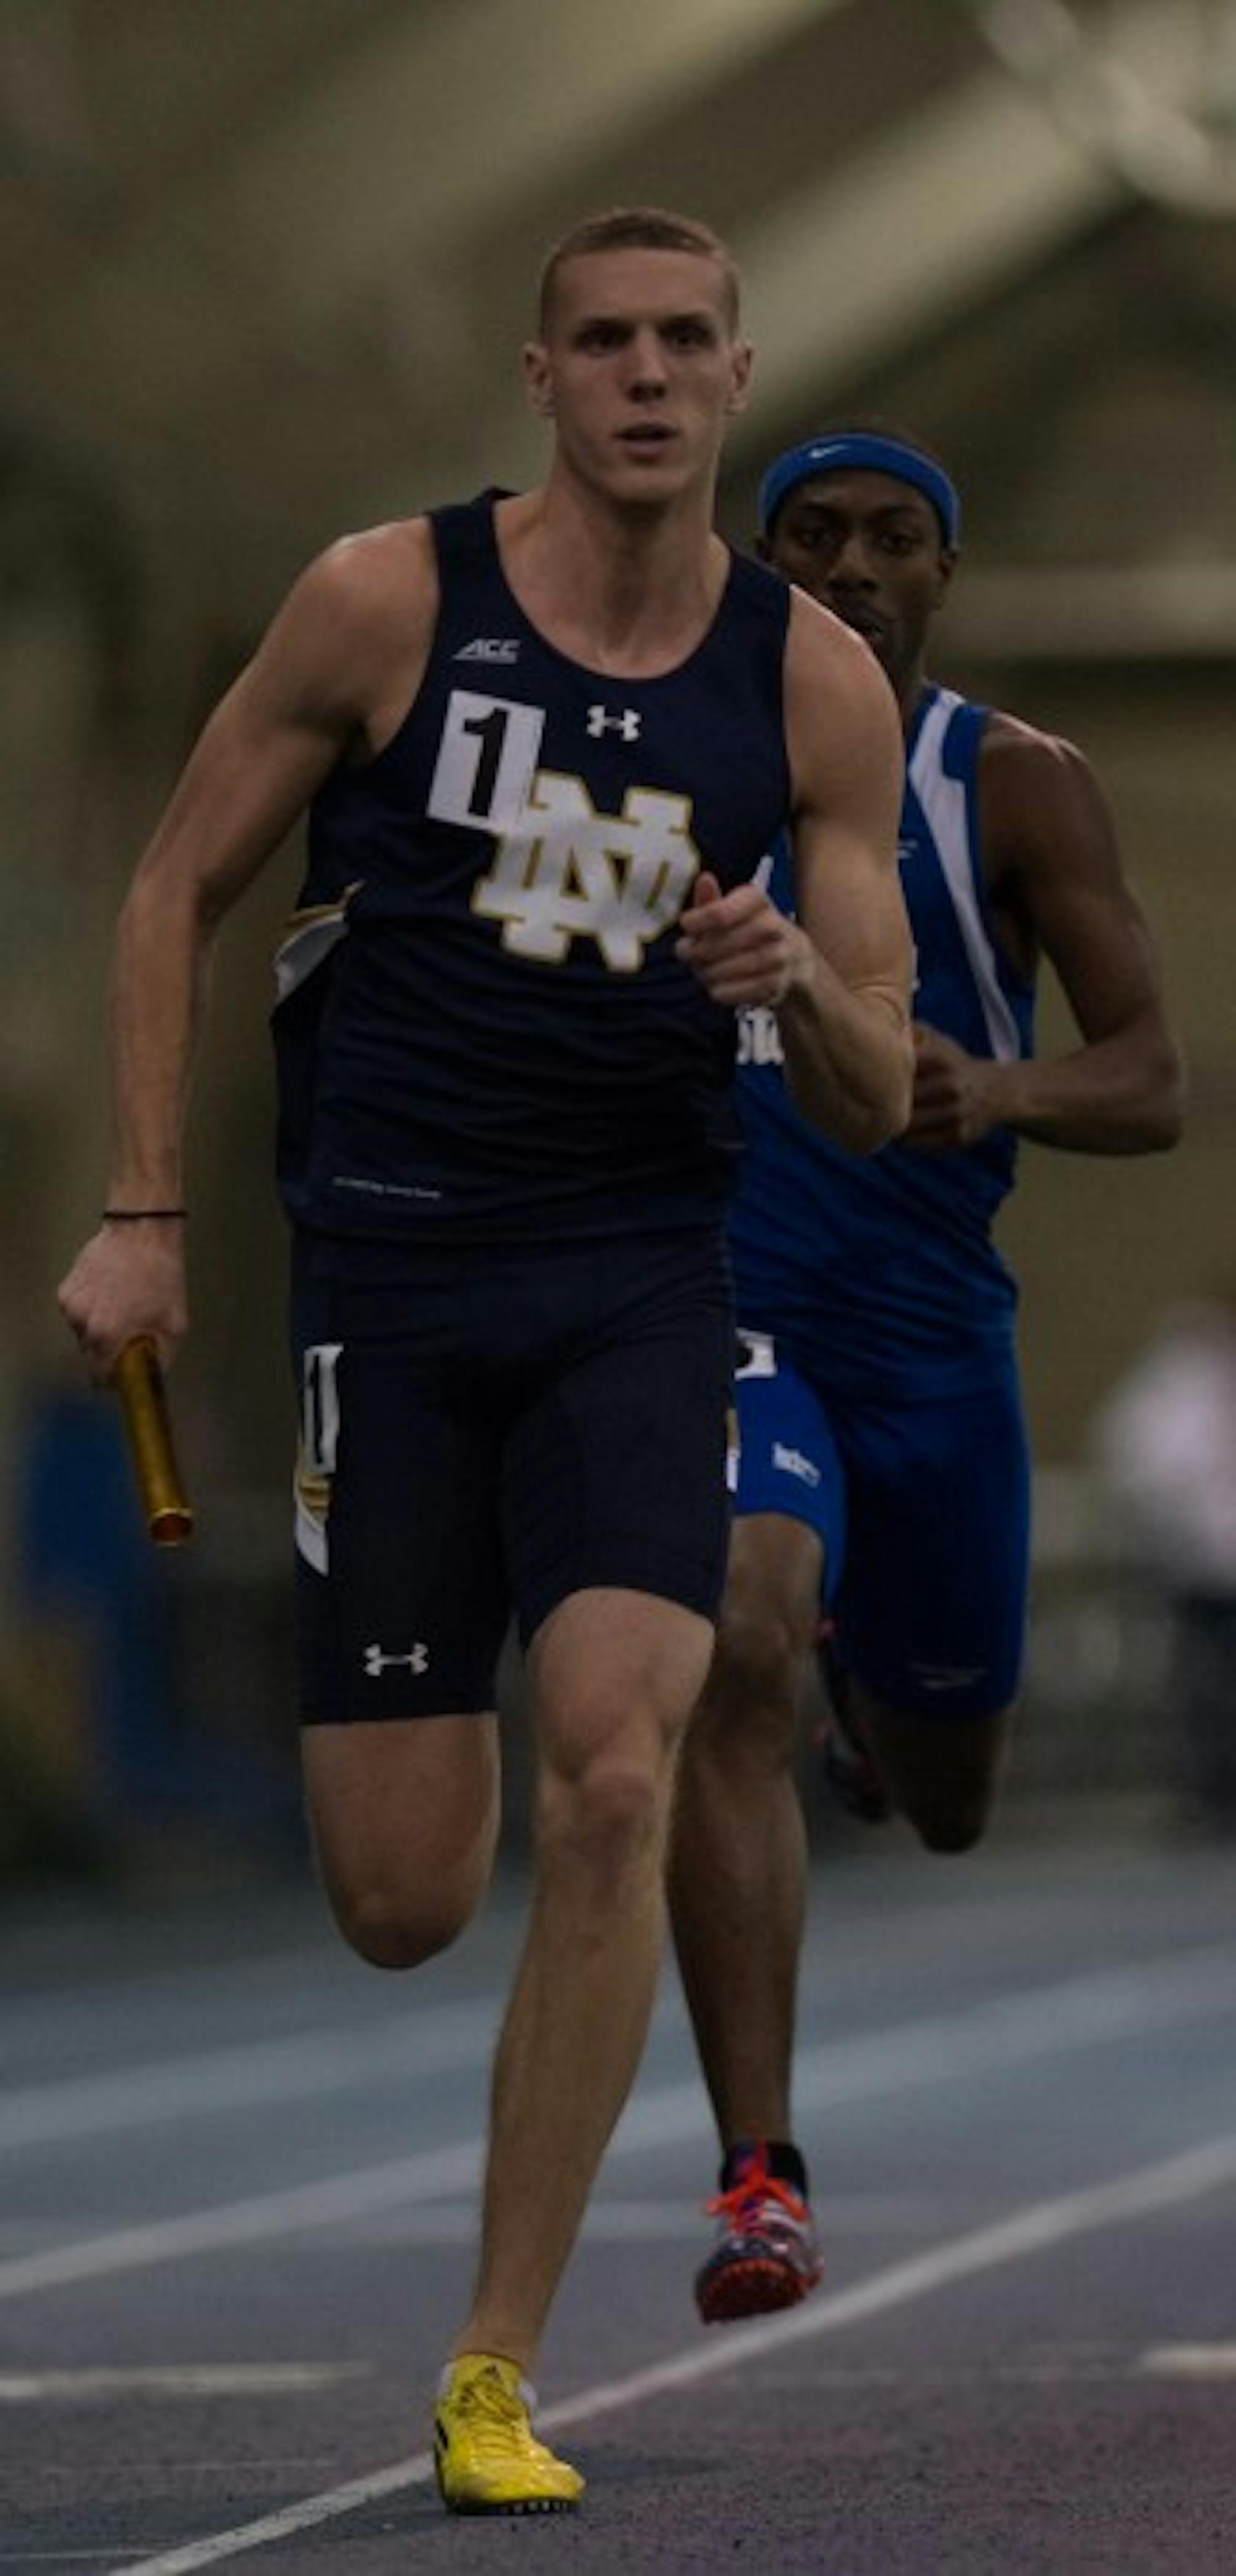 Senior Chris Giesting competes during the Notre Dame Invitational 600m on January 24 at Loftus Sports Center.